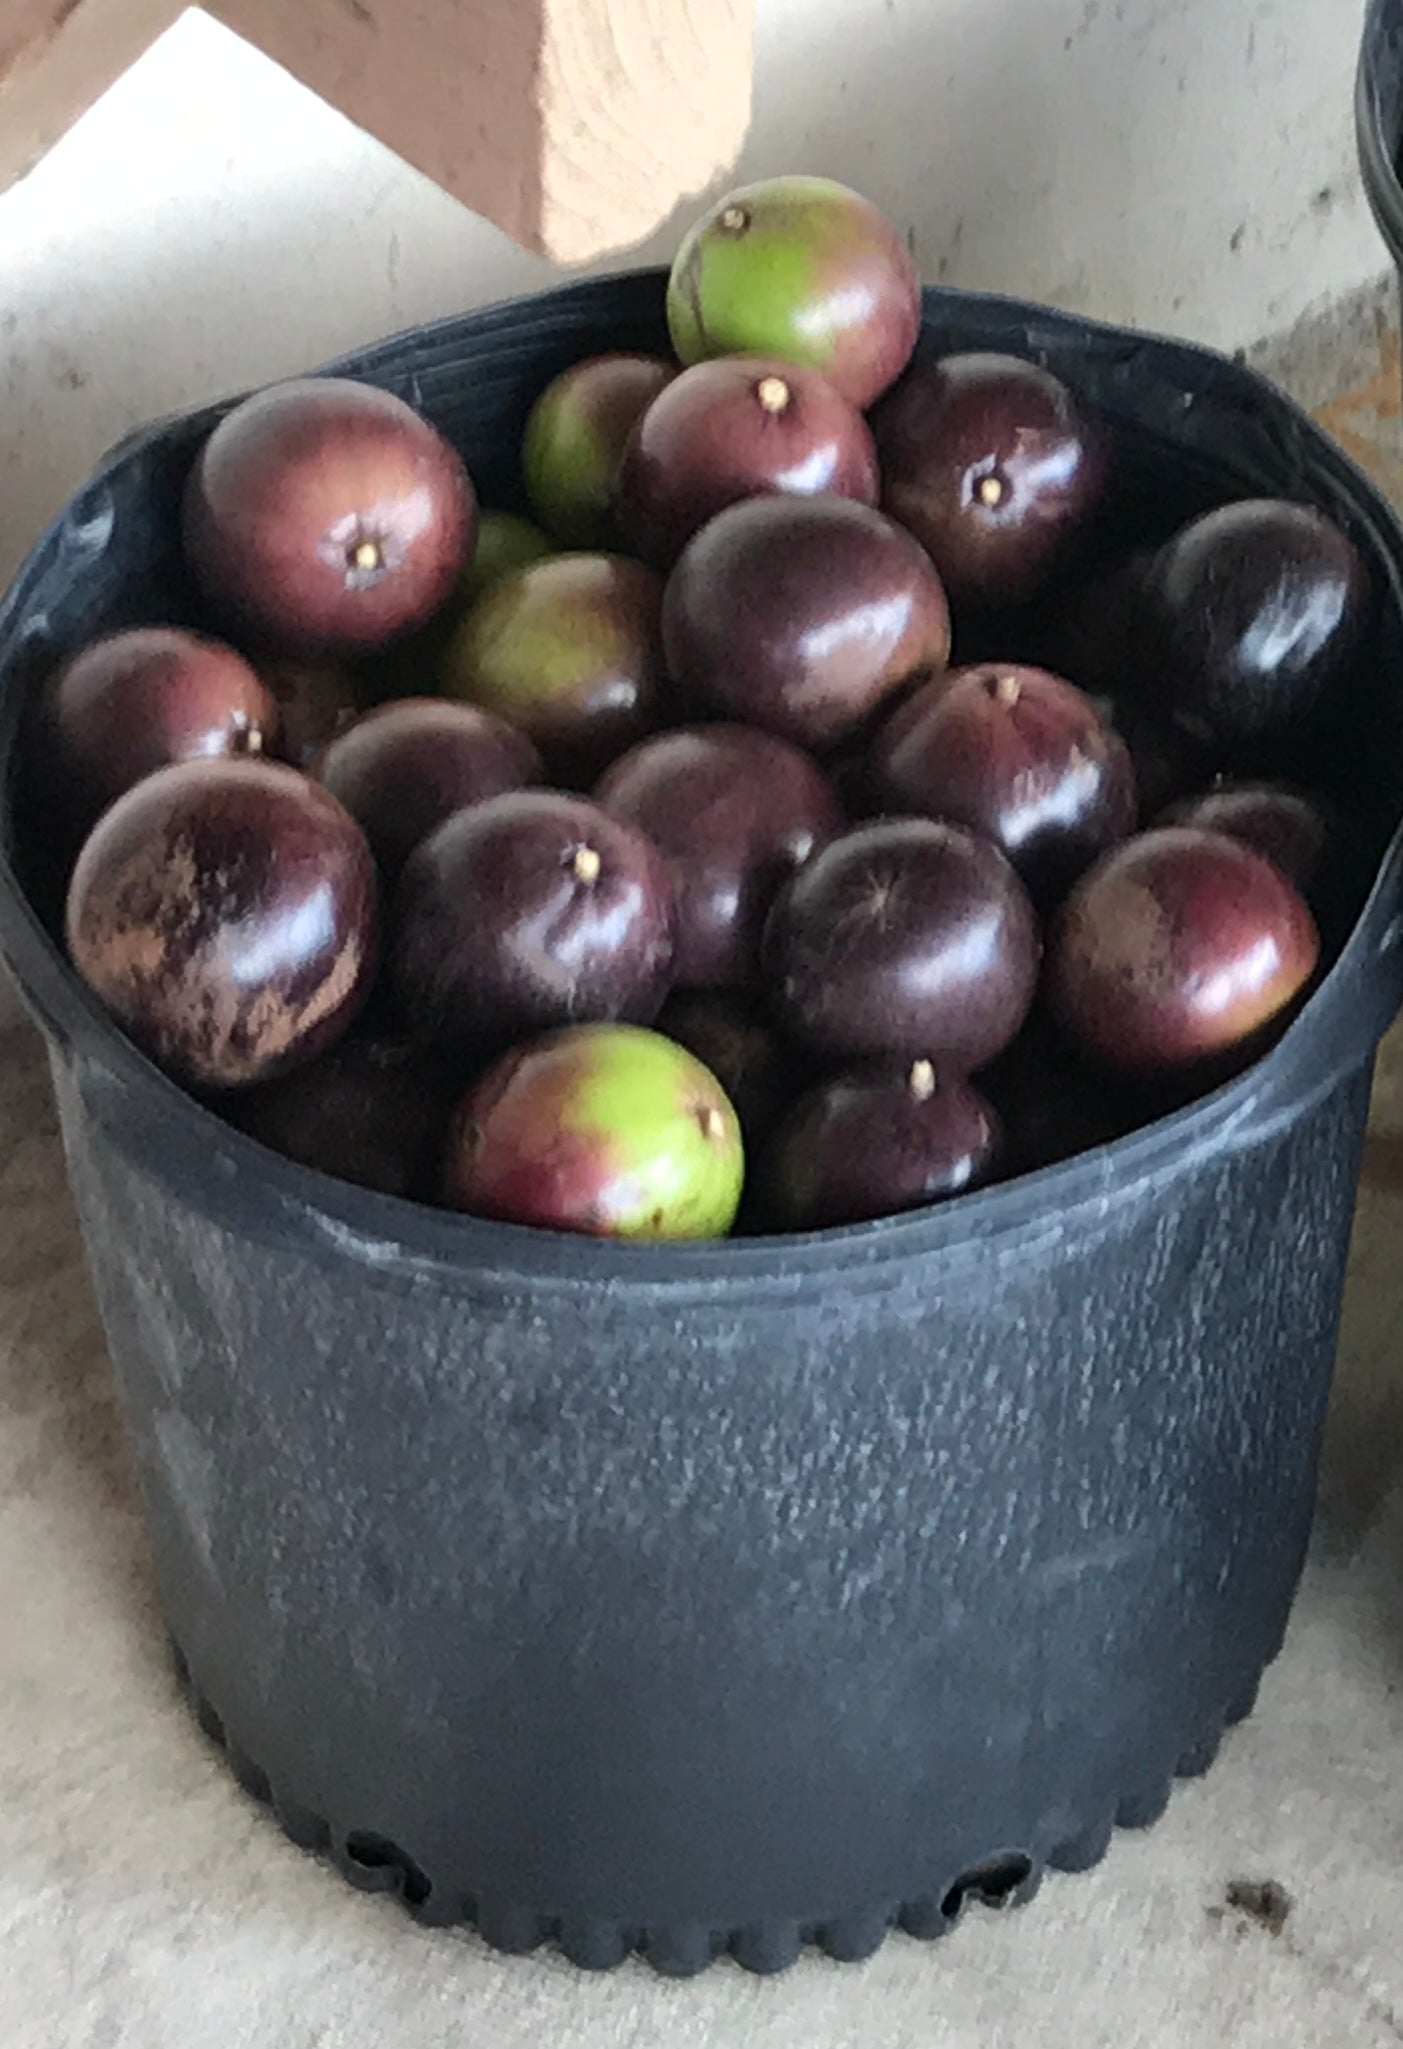 Caimito Fruit ala Star Apple 5 lbs BOX (Unfortunately Star Apple Fruit is on California's do not ship from Florida list)